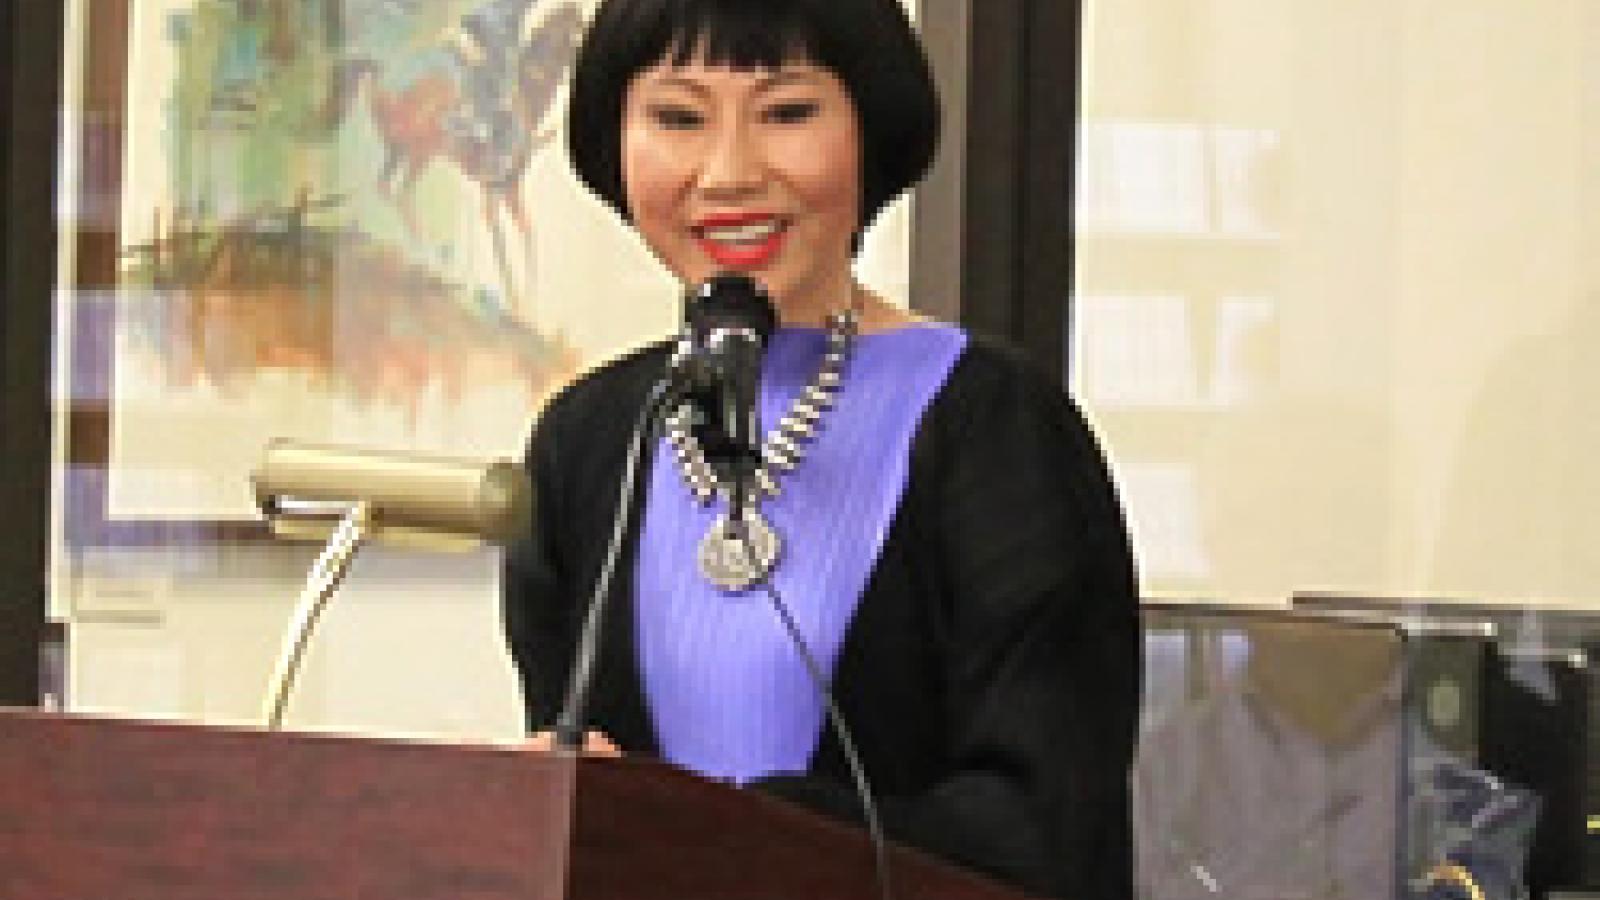 Amy Tan at a Big Read event at the Hillsborough County Public Library in Tampa, Florida. Photo by Bob Shonbrun